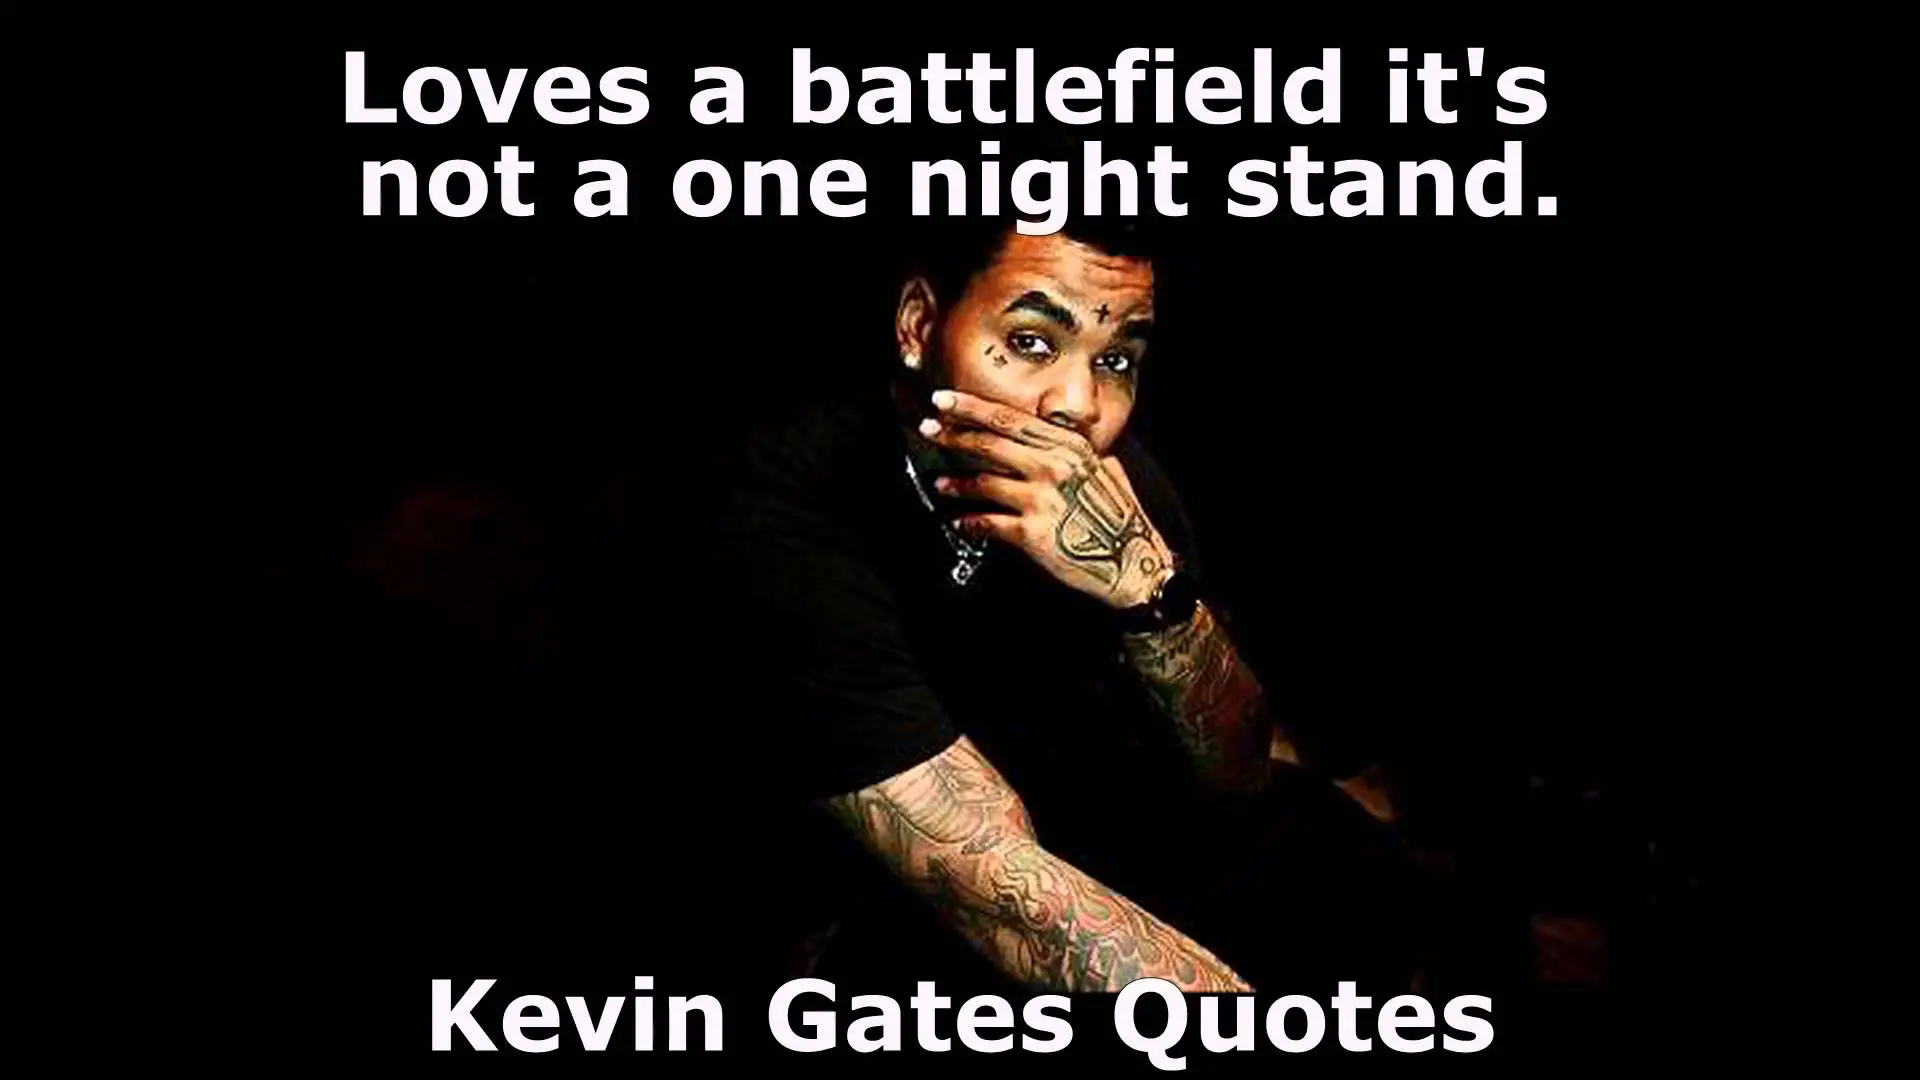 kevin Gates Best Quote “